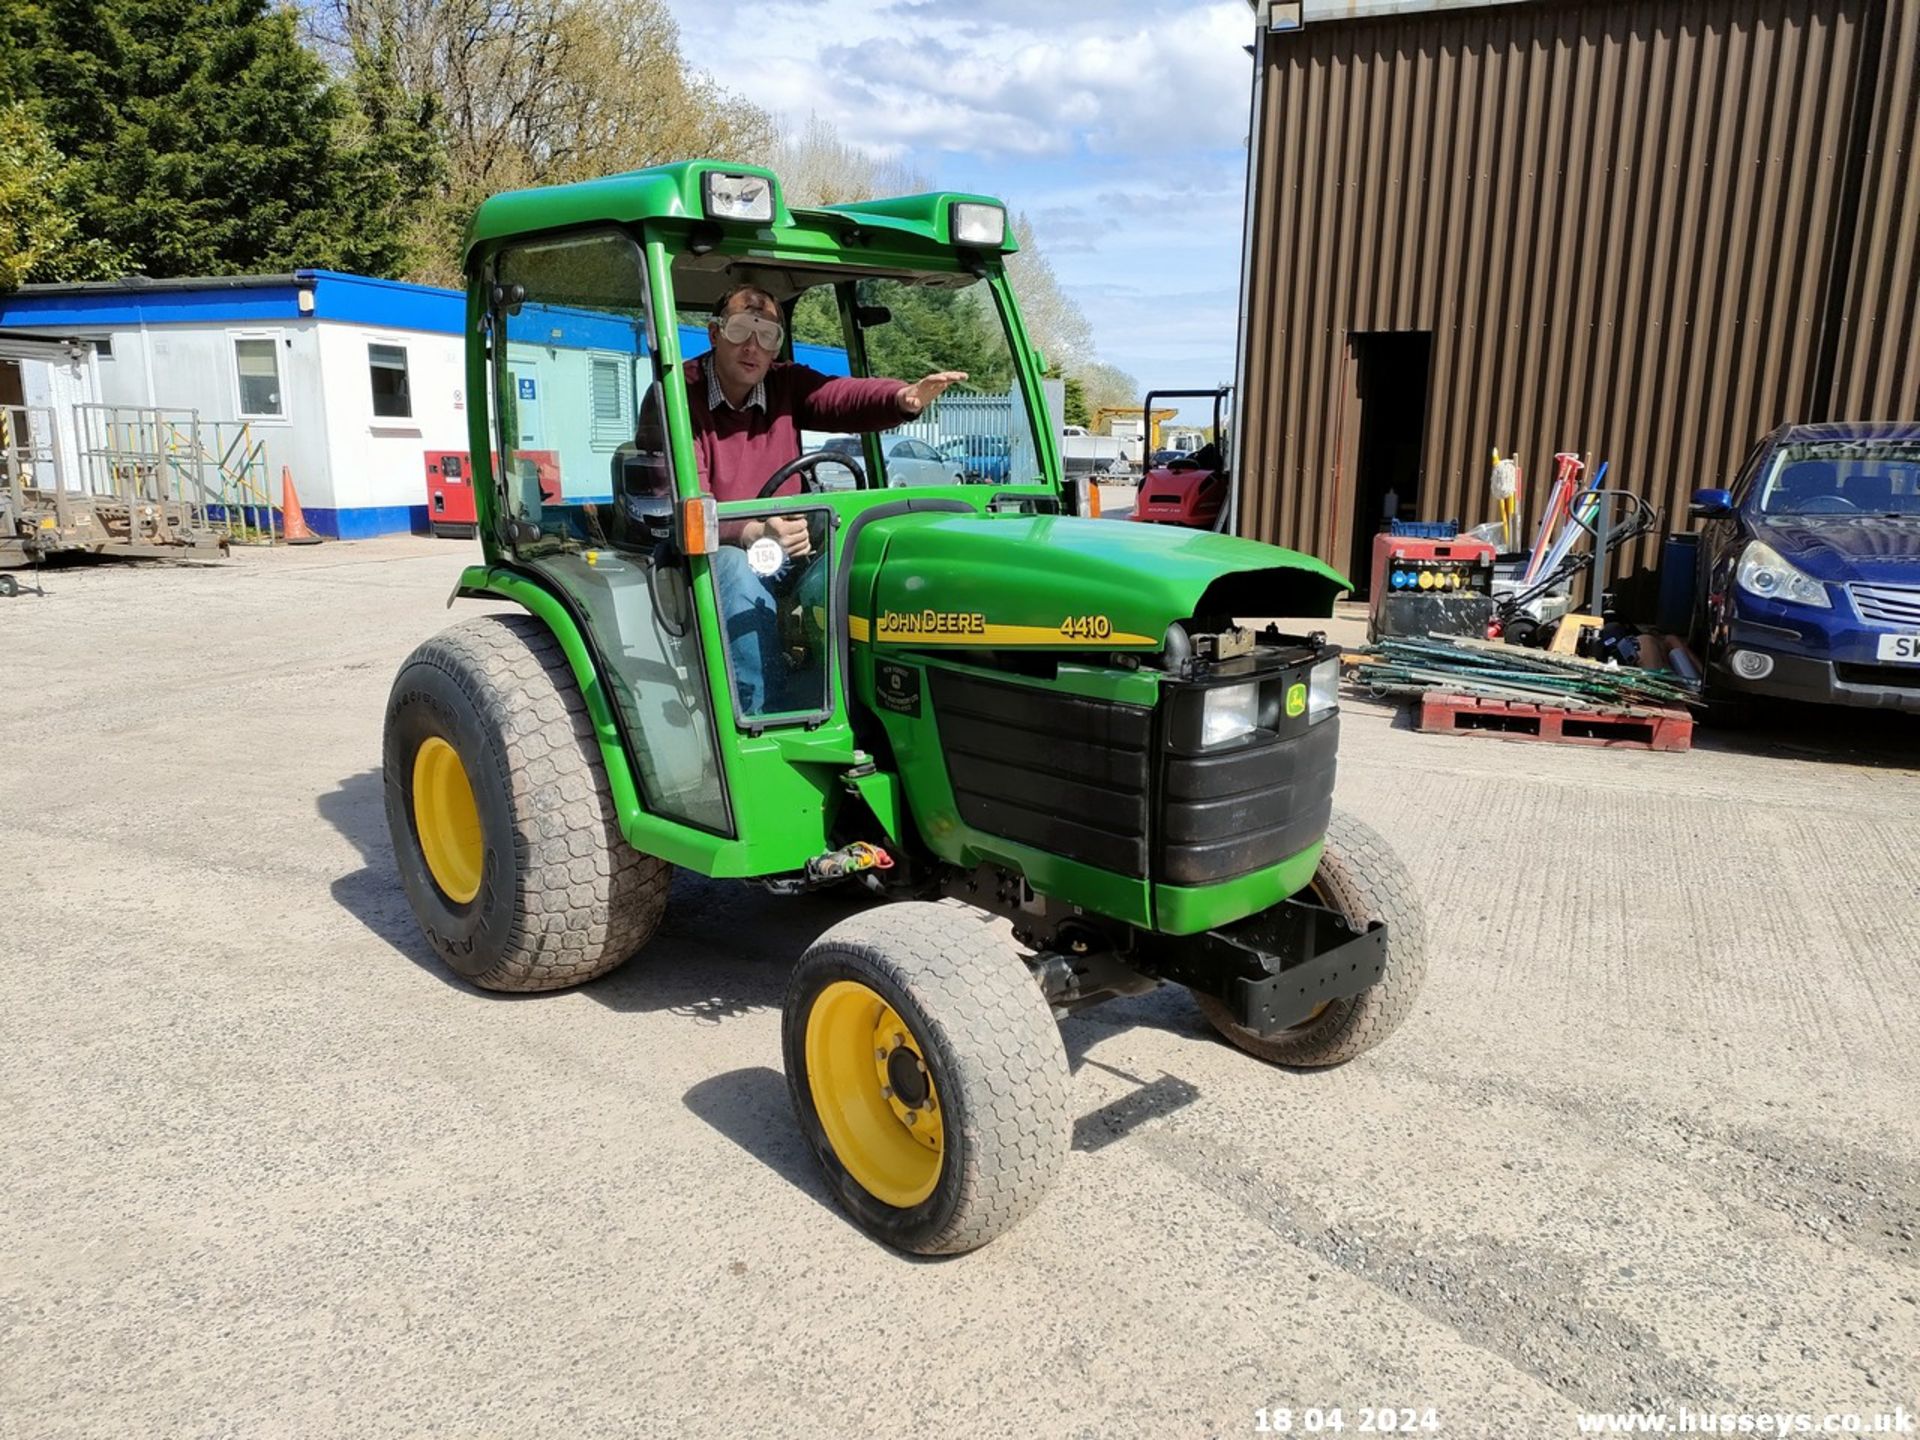 JOHN DEERE 4410 35HP TRACTOR 5410HRS SHUTTLE BRAKES NEED ATTENTION, NO FRONT WNDSCREEN - Image 11 of 18